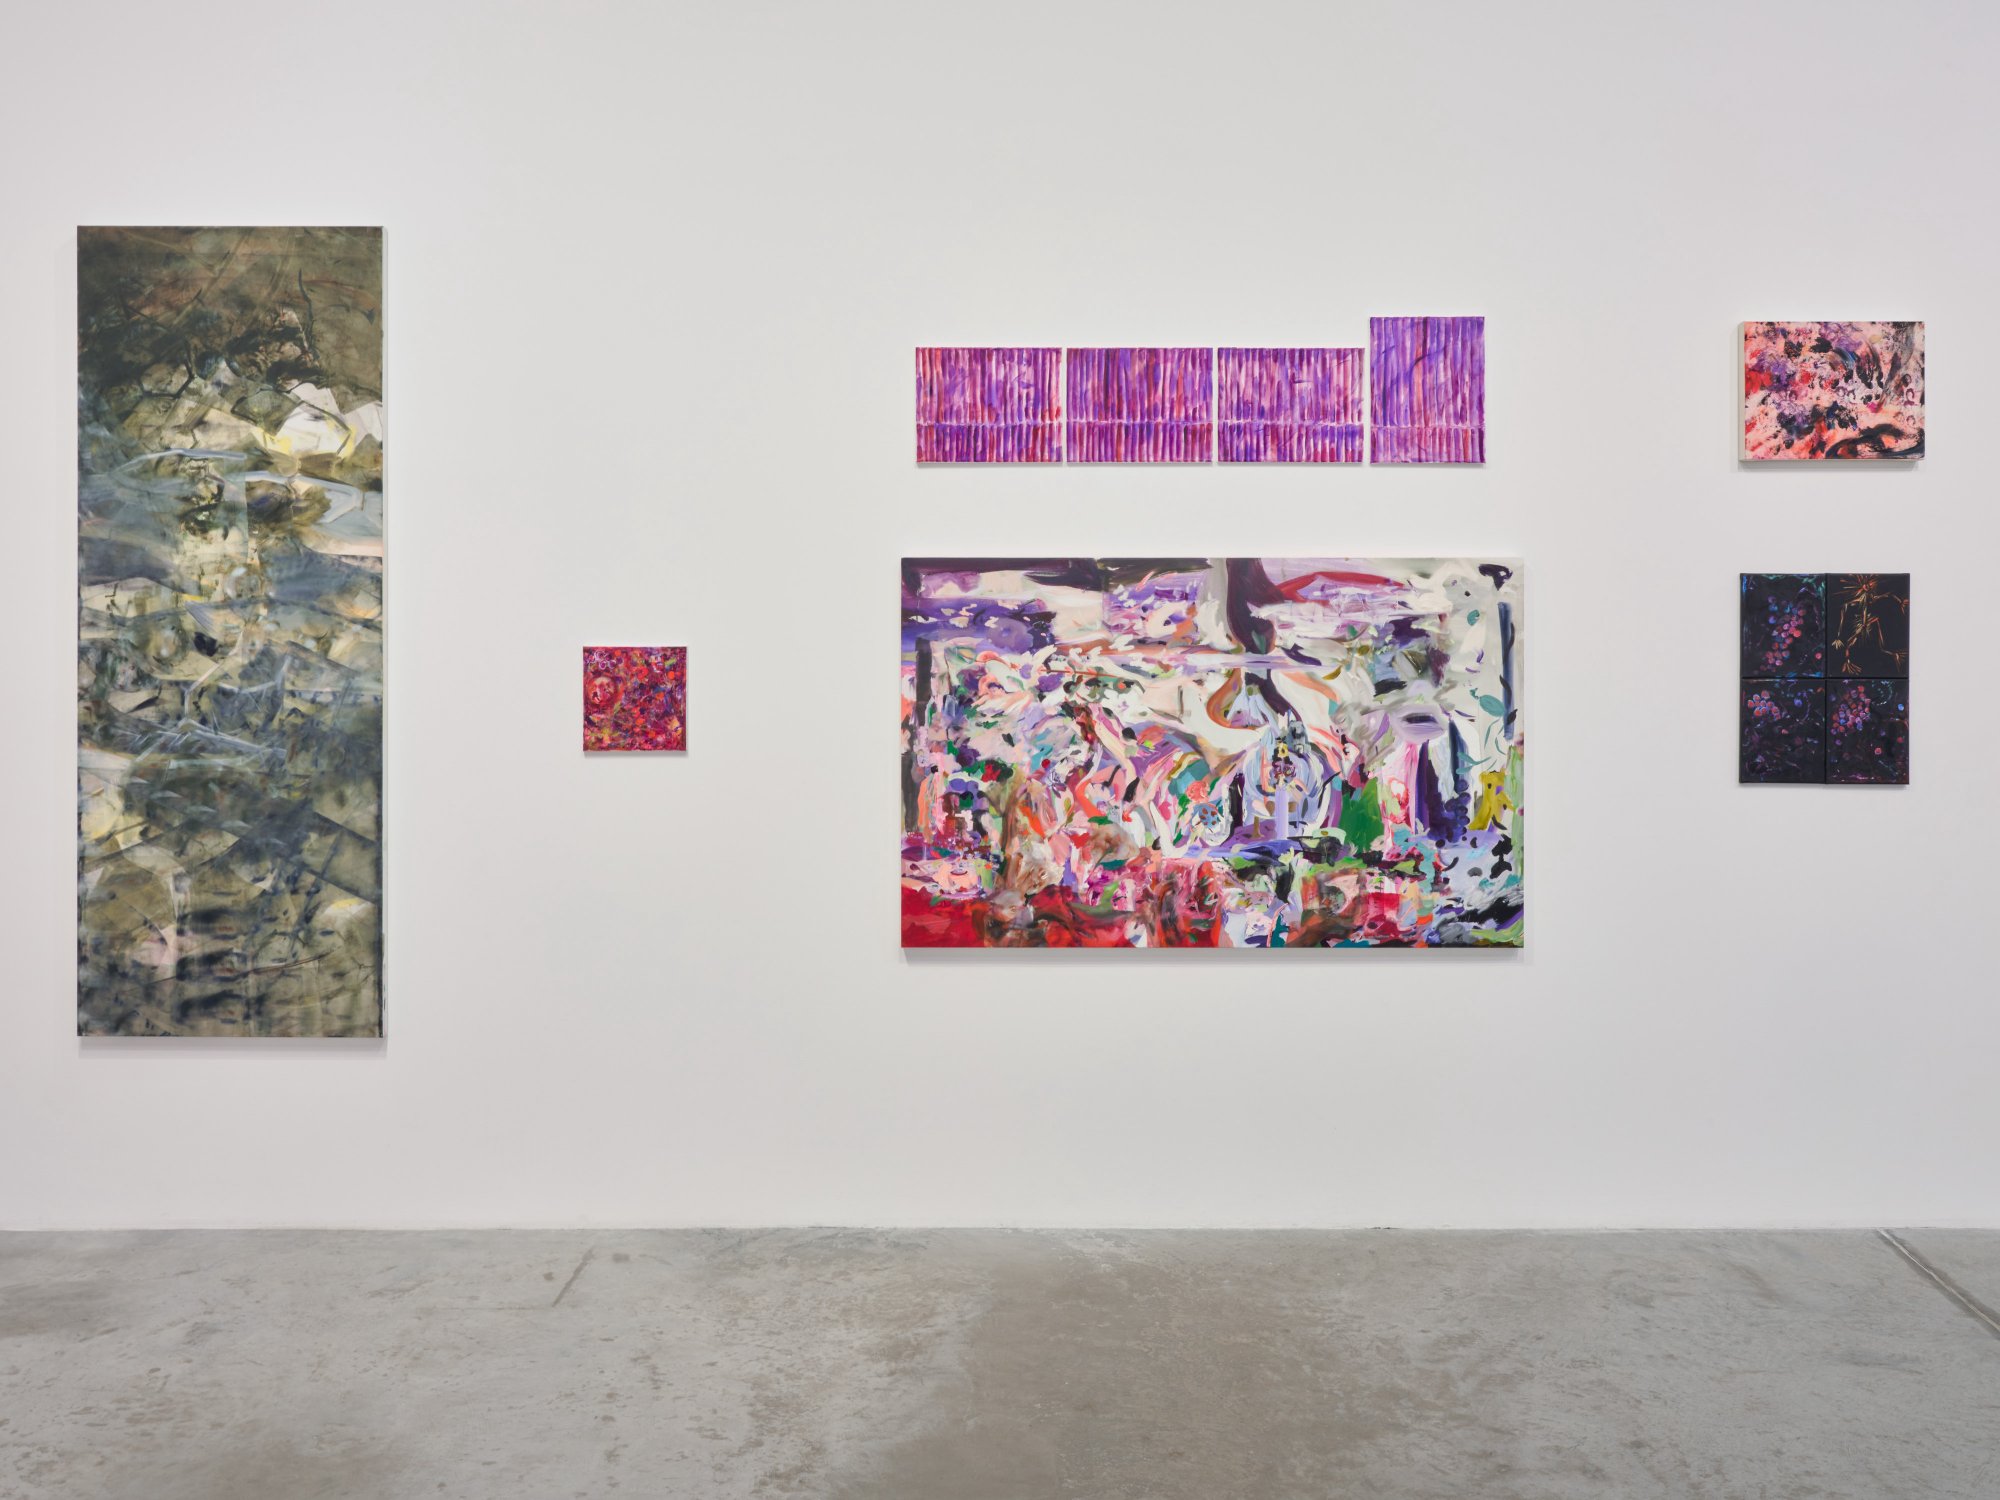 Installation image for Cecily Brown, Jutta Koether: Good Luck Spot, at Bortolami